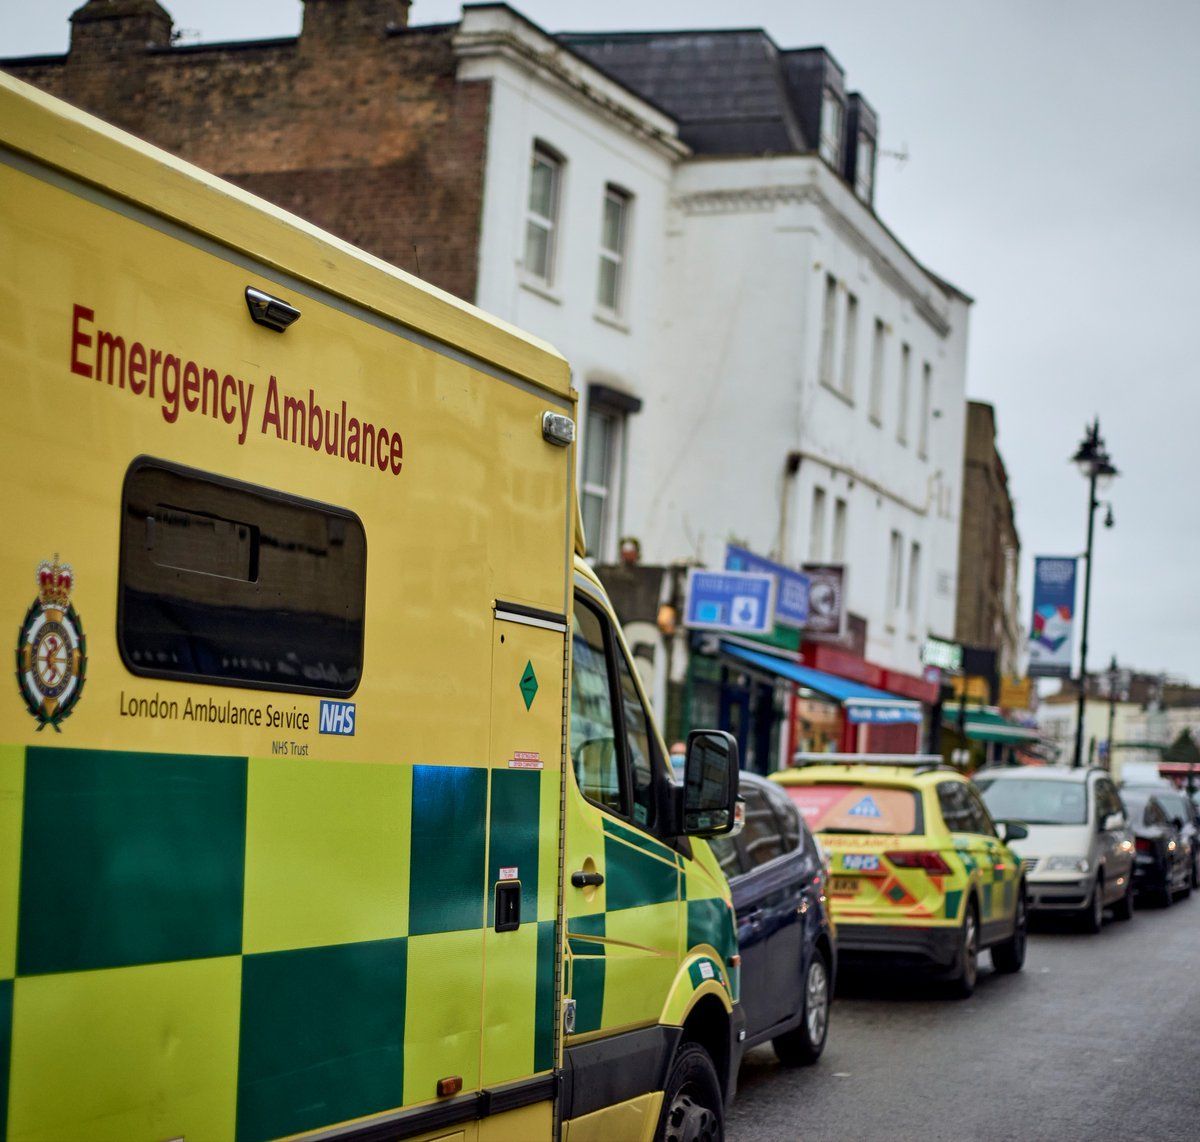 Please #HelpUsToHelpYou today by using 111.nhs.uk if you need urgent medical help. If it’s a serious medical emergency – such as a heart attack, stroke, unconsciousness, chest pain, severe loss of blood or choking – don’t hesitate to call 999. #BankHoliday